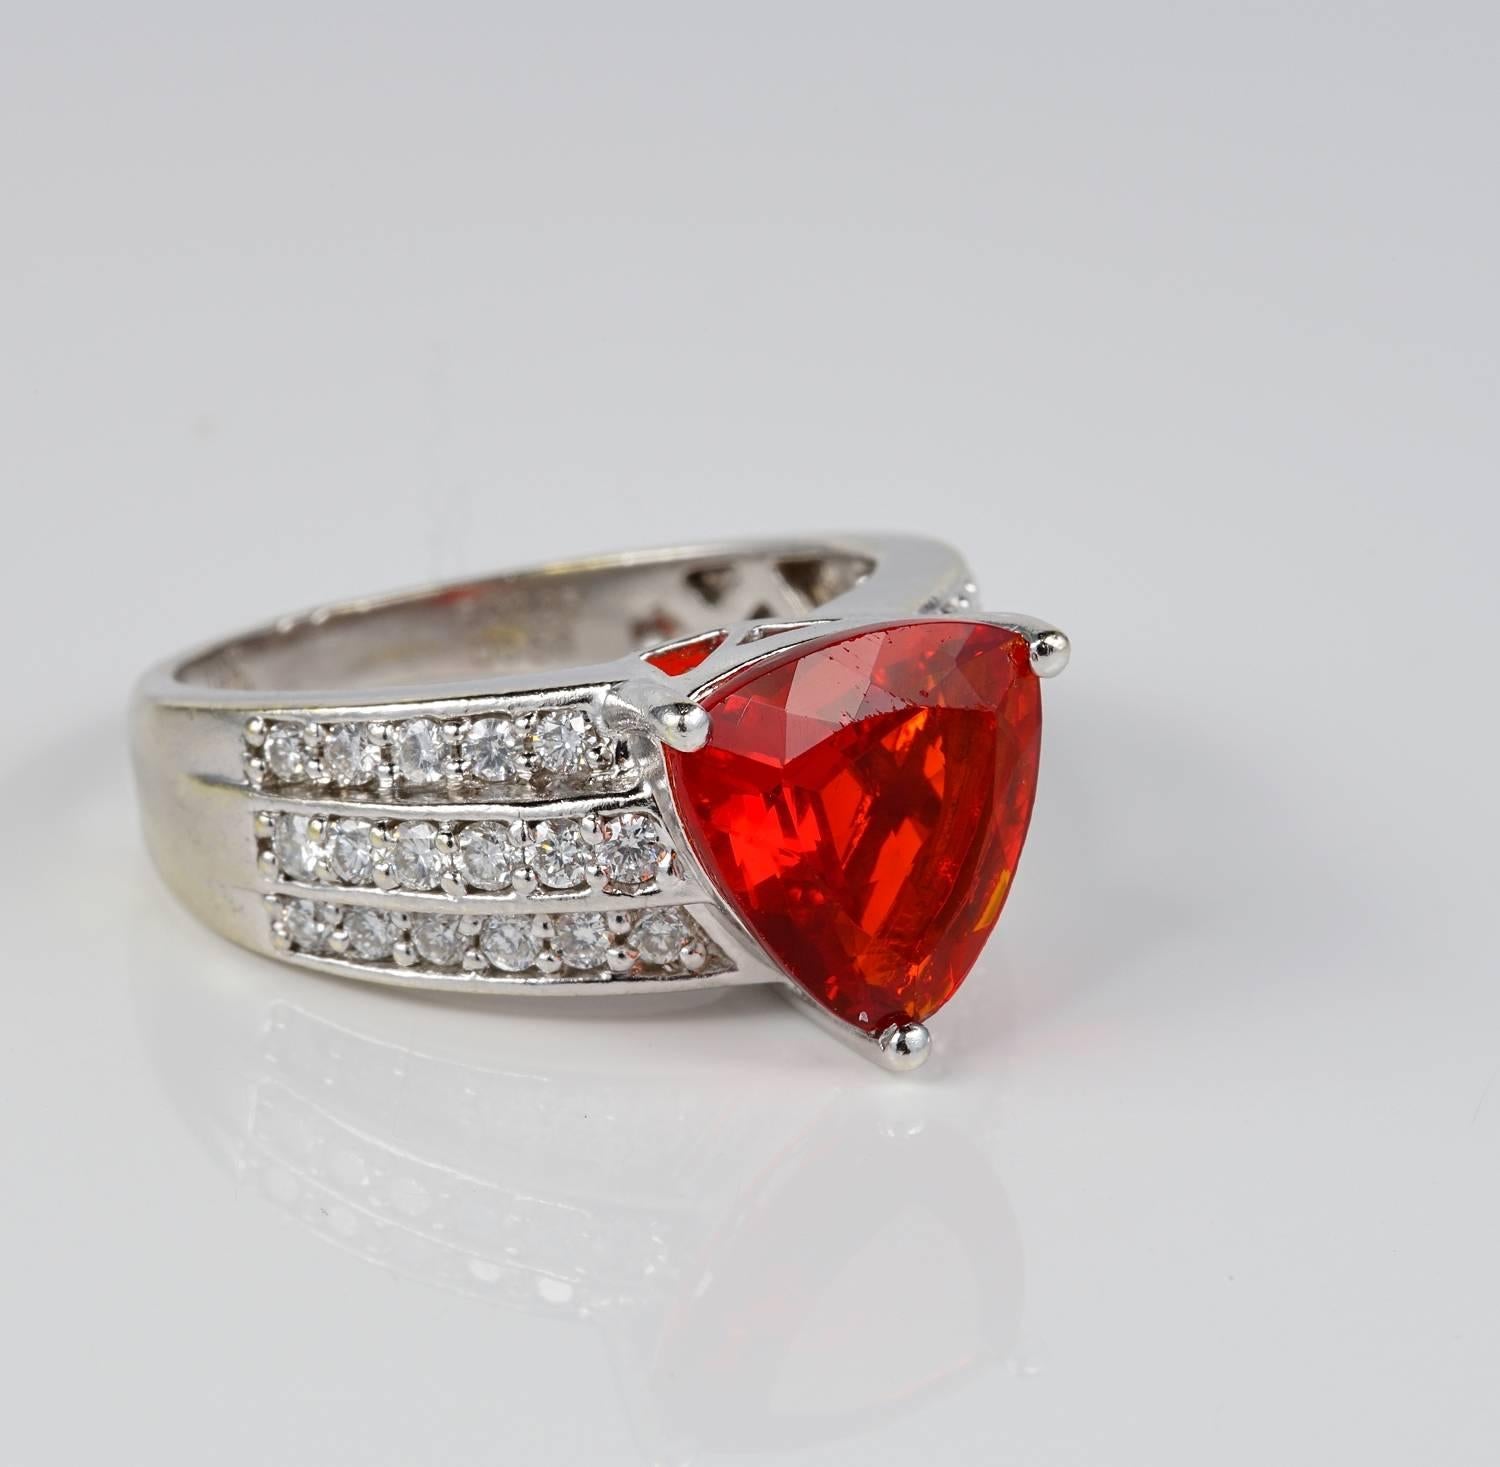 An exceptional focal point is made by the triangular cut Natural Fire Opal set in the middle. Strong, vivacious RED ORANGY colour so lively and unique which is rare to find in Fire Opals, quite a statement.
The ring itself is modelled like a Diamond